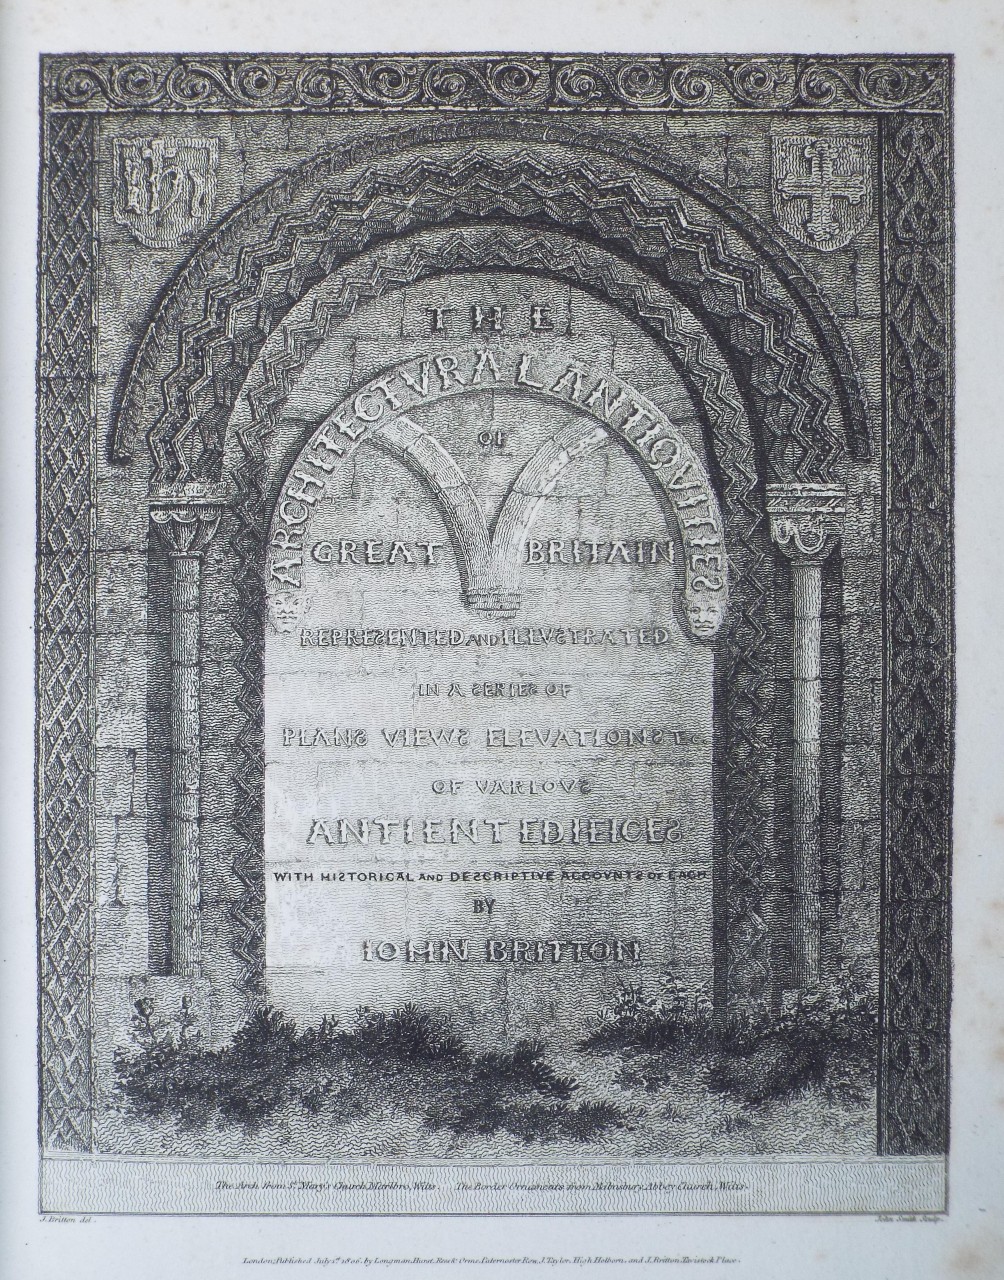 Print - The Arch from St. Mary's Church, Marlbro, Wilts. The Border Ornaments from Malmesbury Abbey-Church, Wilts. - Smith